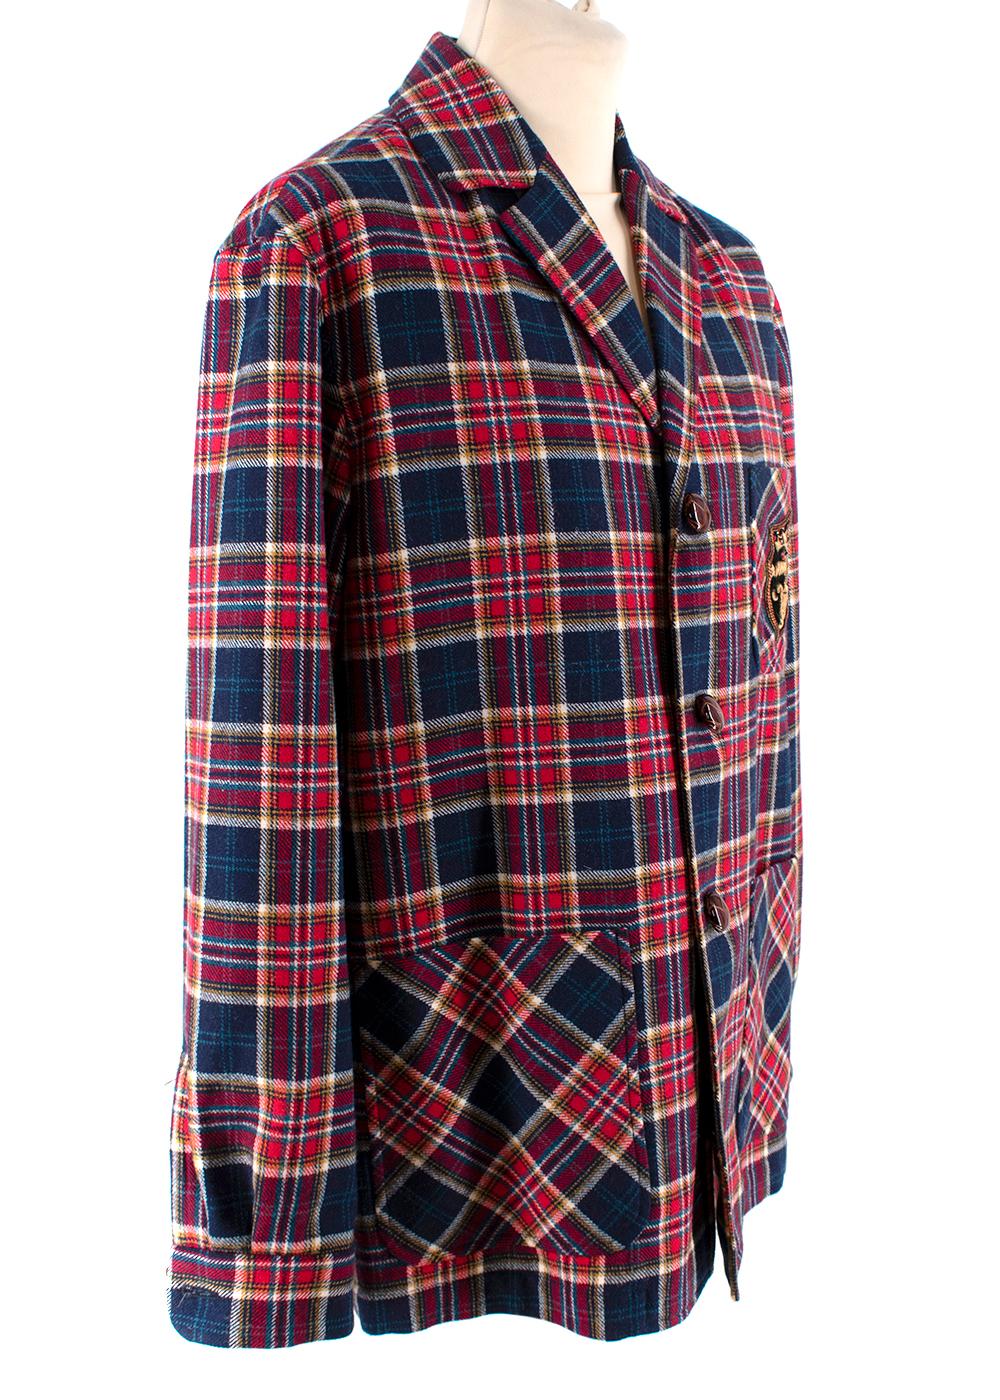 Gucci Navy & Red Wool Tartan Single Breasted Blazer

- Lightly tailored single-breasted jacket
- Peak lapel
- Patch hip and breast pockets
- House creast on the chest

Materials 
90% Wool
10% Polyamide
Trimming
57% Viscose 
30% Brass 
5% Silk
5%